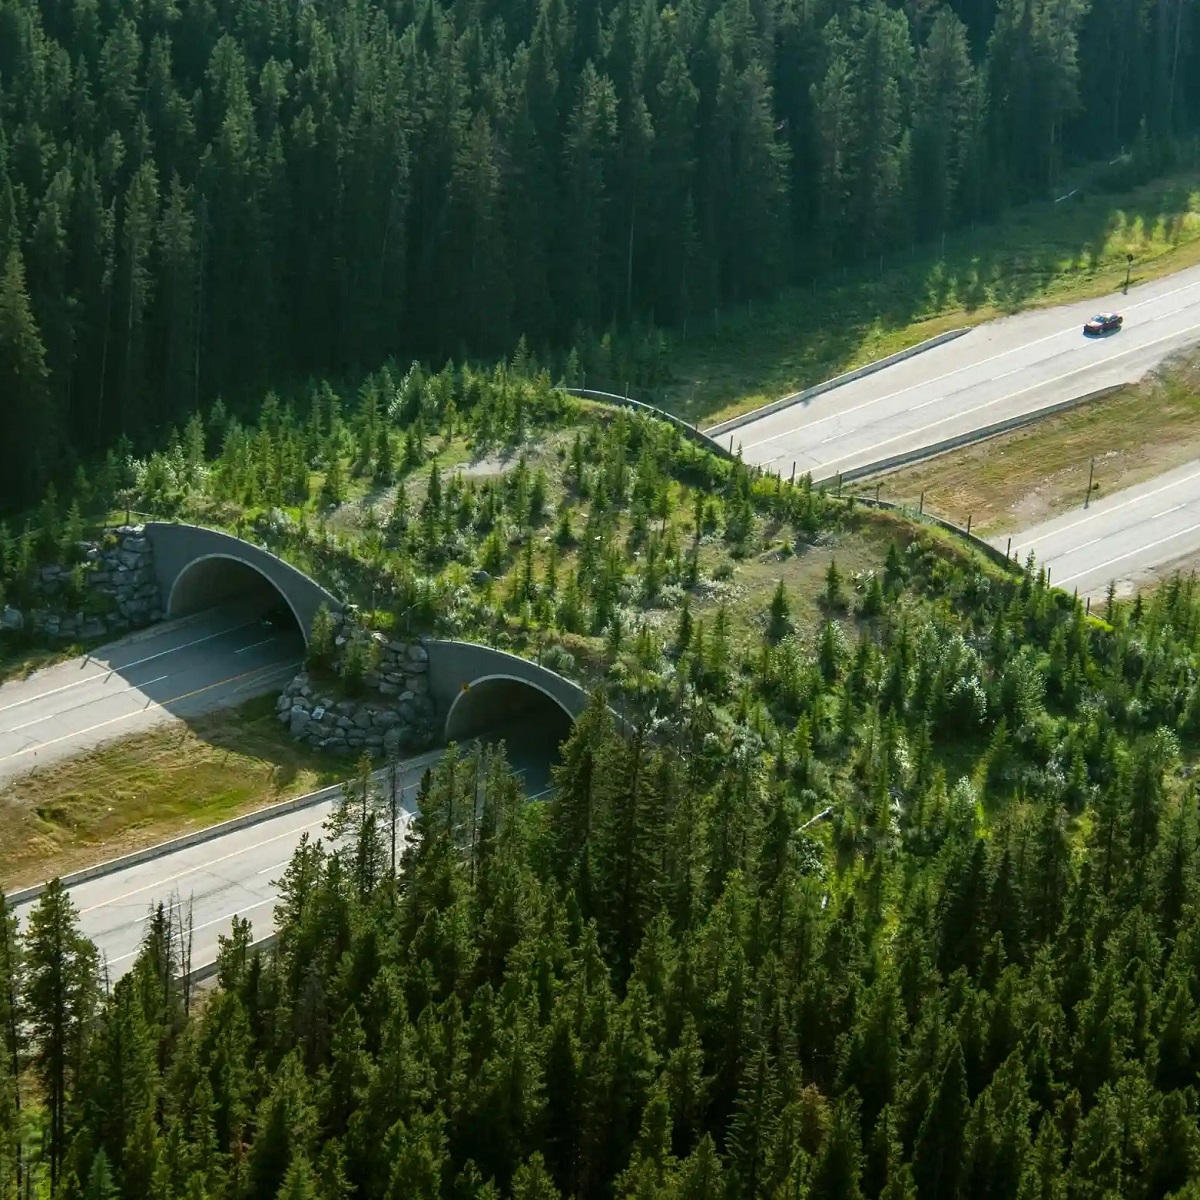 Banff Wildlife Crossing Project, Banff, Alberta, Canada. Combined With Fencing To Keep The Animals Off The Road, The Structures Have Reduced Animal-Vehicle Collisions In The Area By More Than 80%